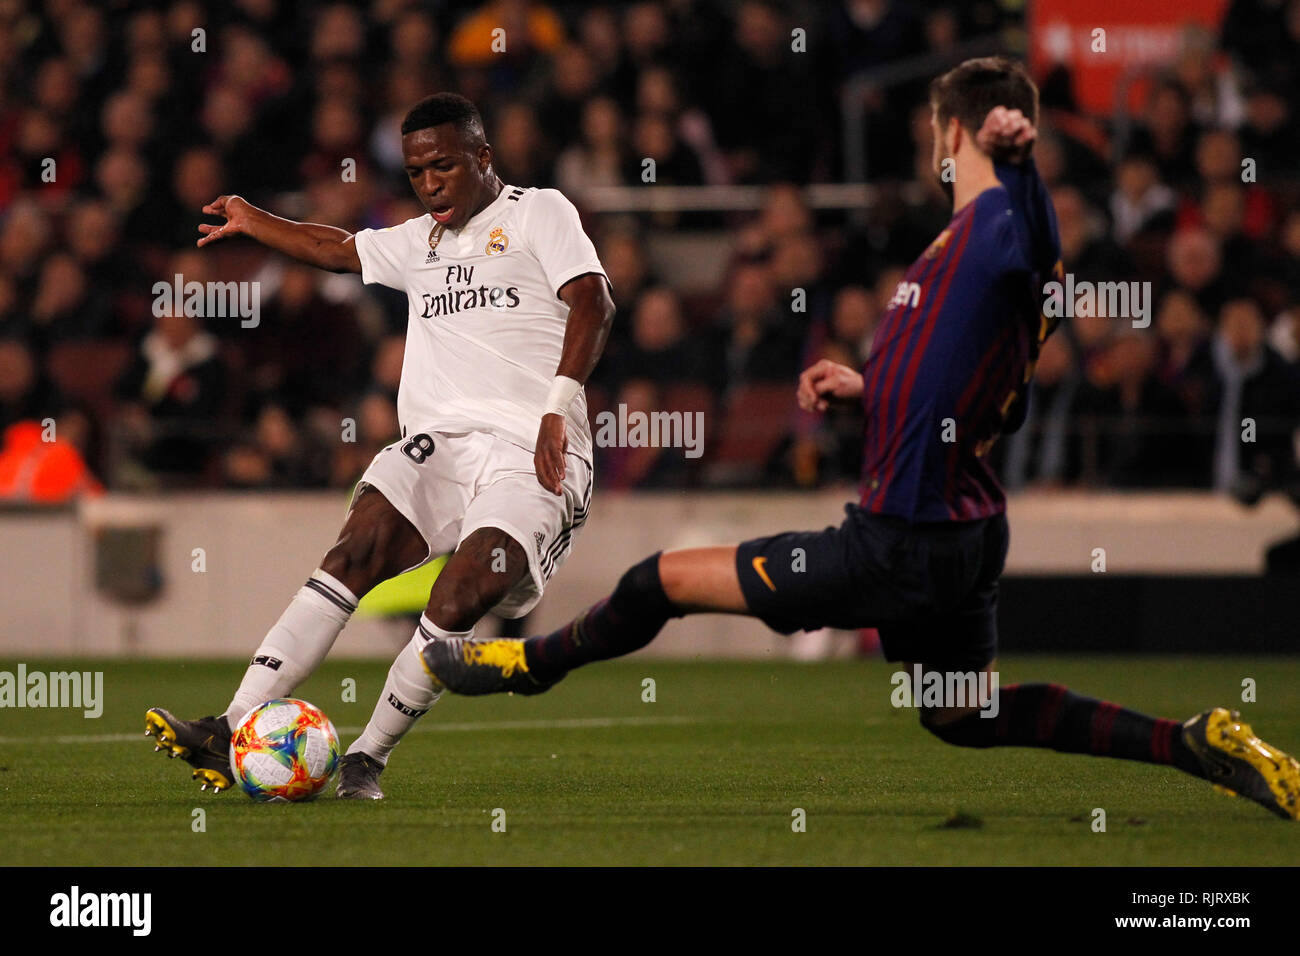 Spain La Copa, Semi finals, First Leg, FC Barcelona vs. Real Madrid, reporting live during the game -- Vinicius, Brazilian winger for Real Madrid shoots the ball in from t of Gerard Pique, spanish defender for FC Barcelona who tries to stop him Stock Photo